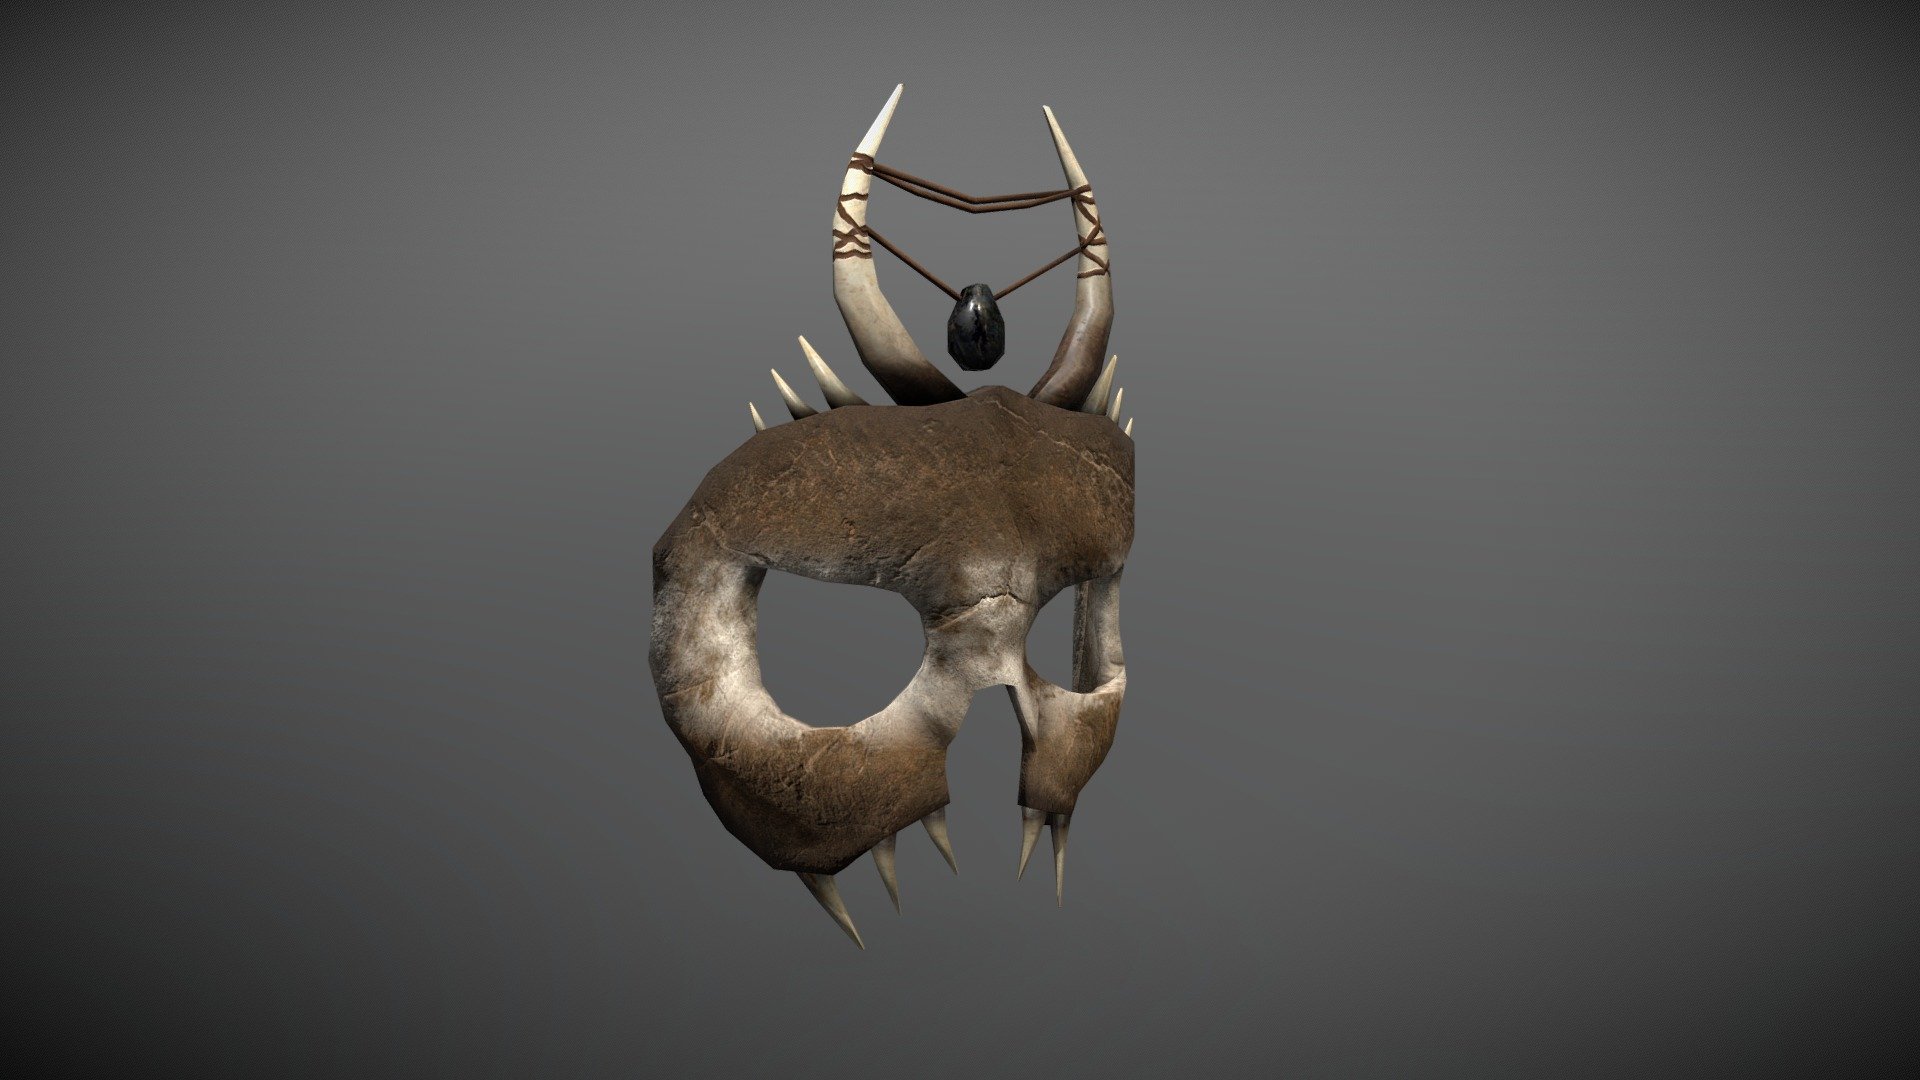 A voodoo mask for characters or for decoration.

Includes 1K and 2K textures (Albedo, Roughness, AO, Normal) 3d model